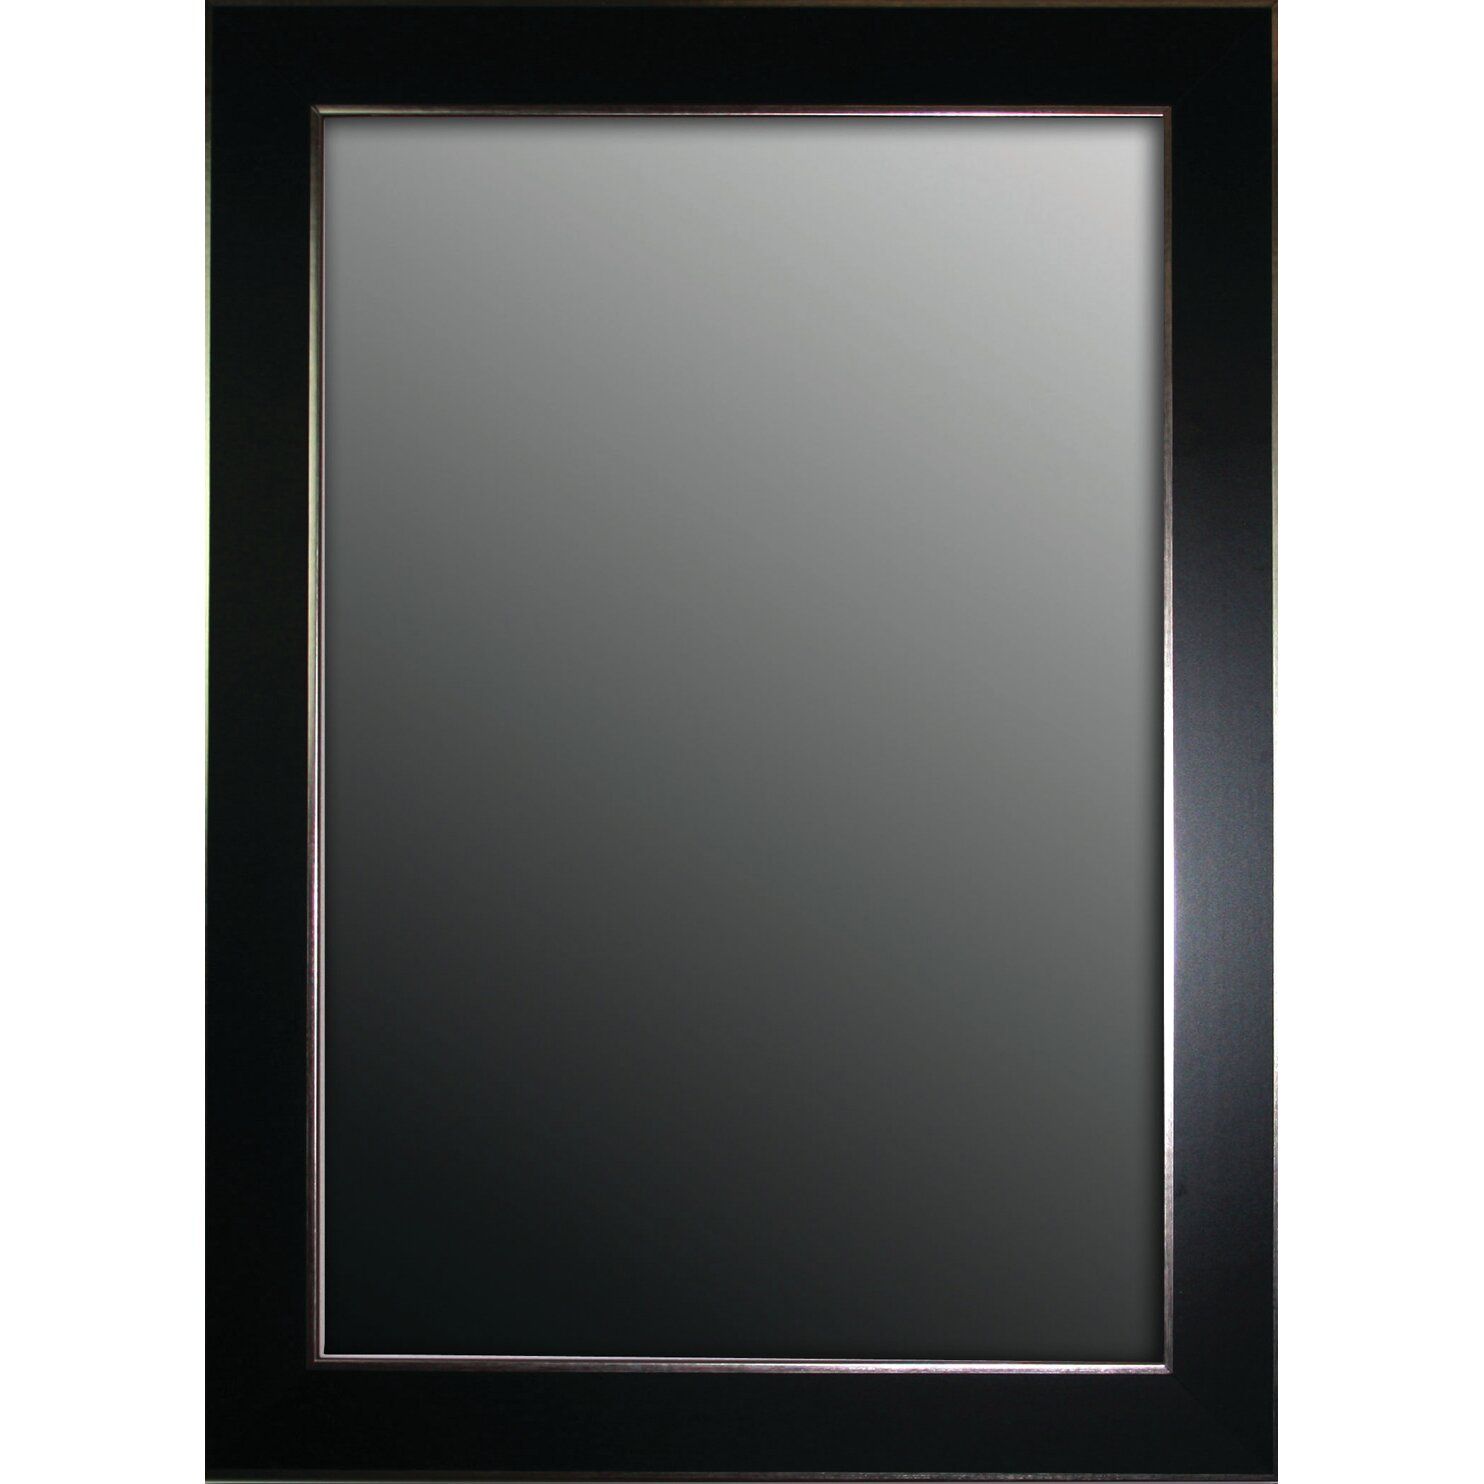 Second Look Mirrors Semi Matte Black With Silver Trim Edges Wall Mirror Inside Smoke Edge Wall Mirrors (View 4 of 15)